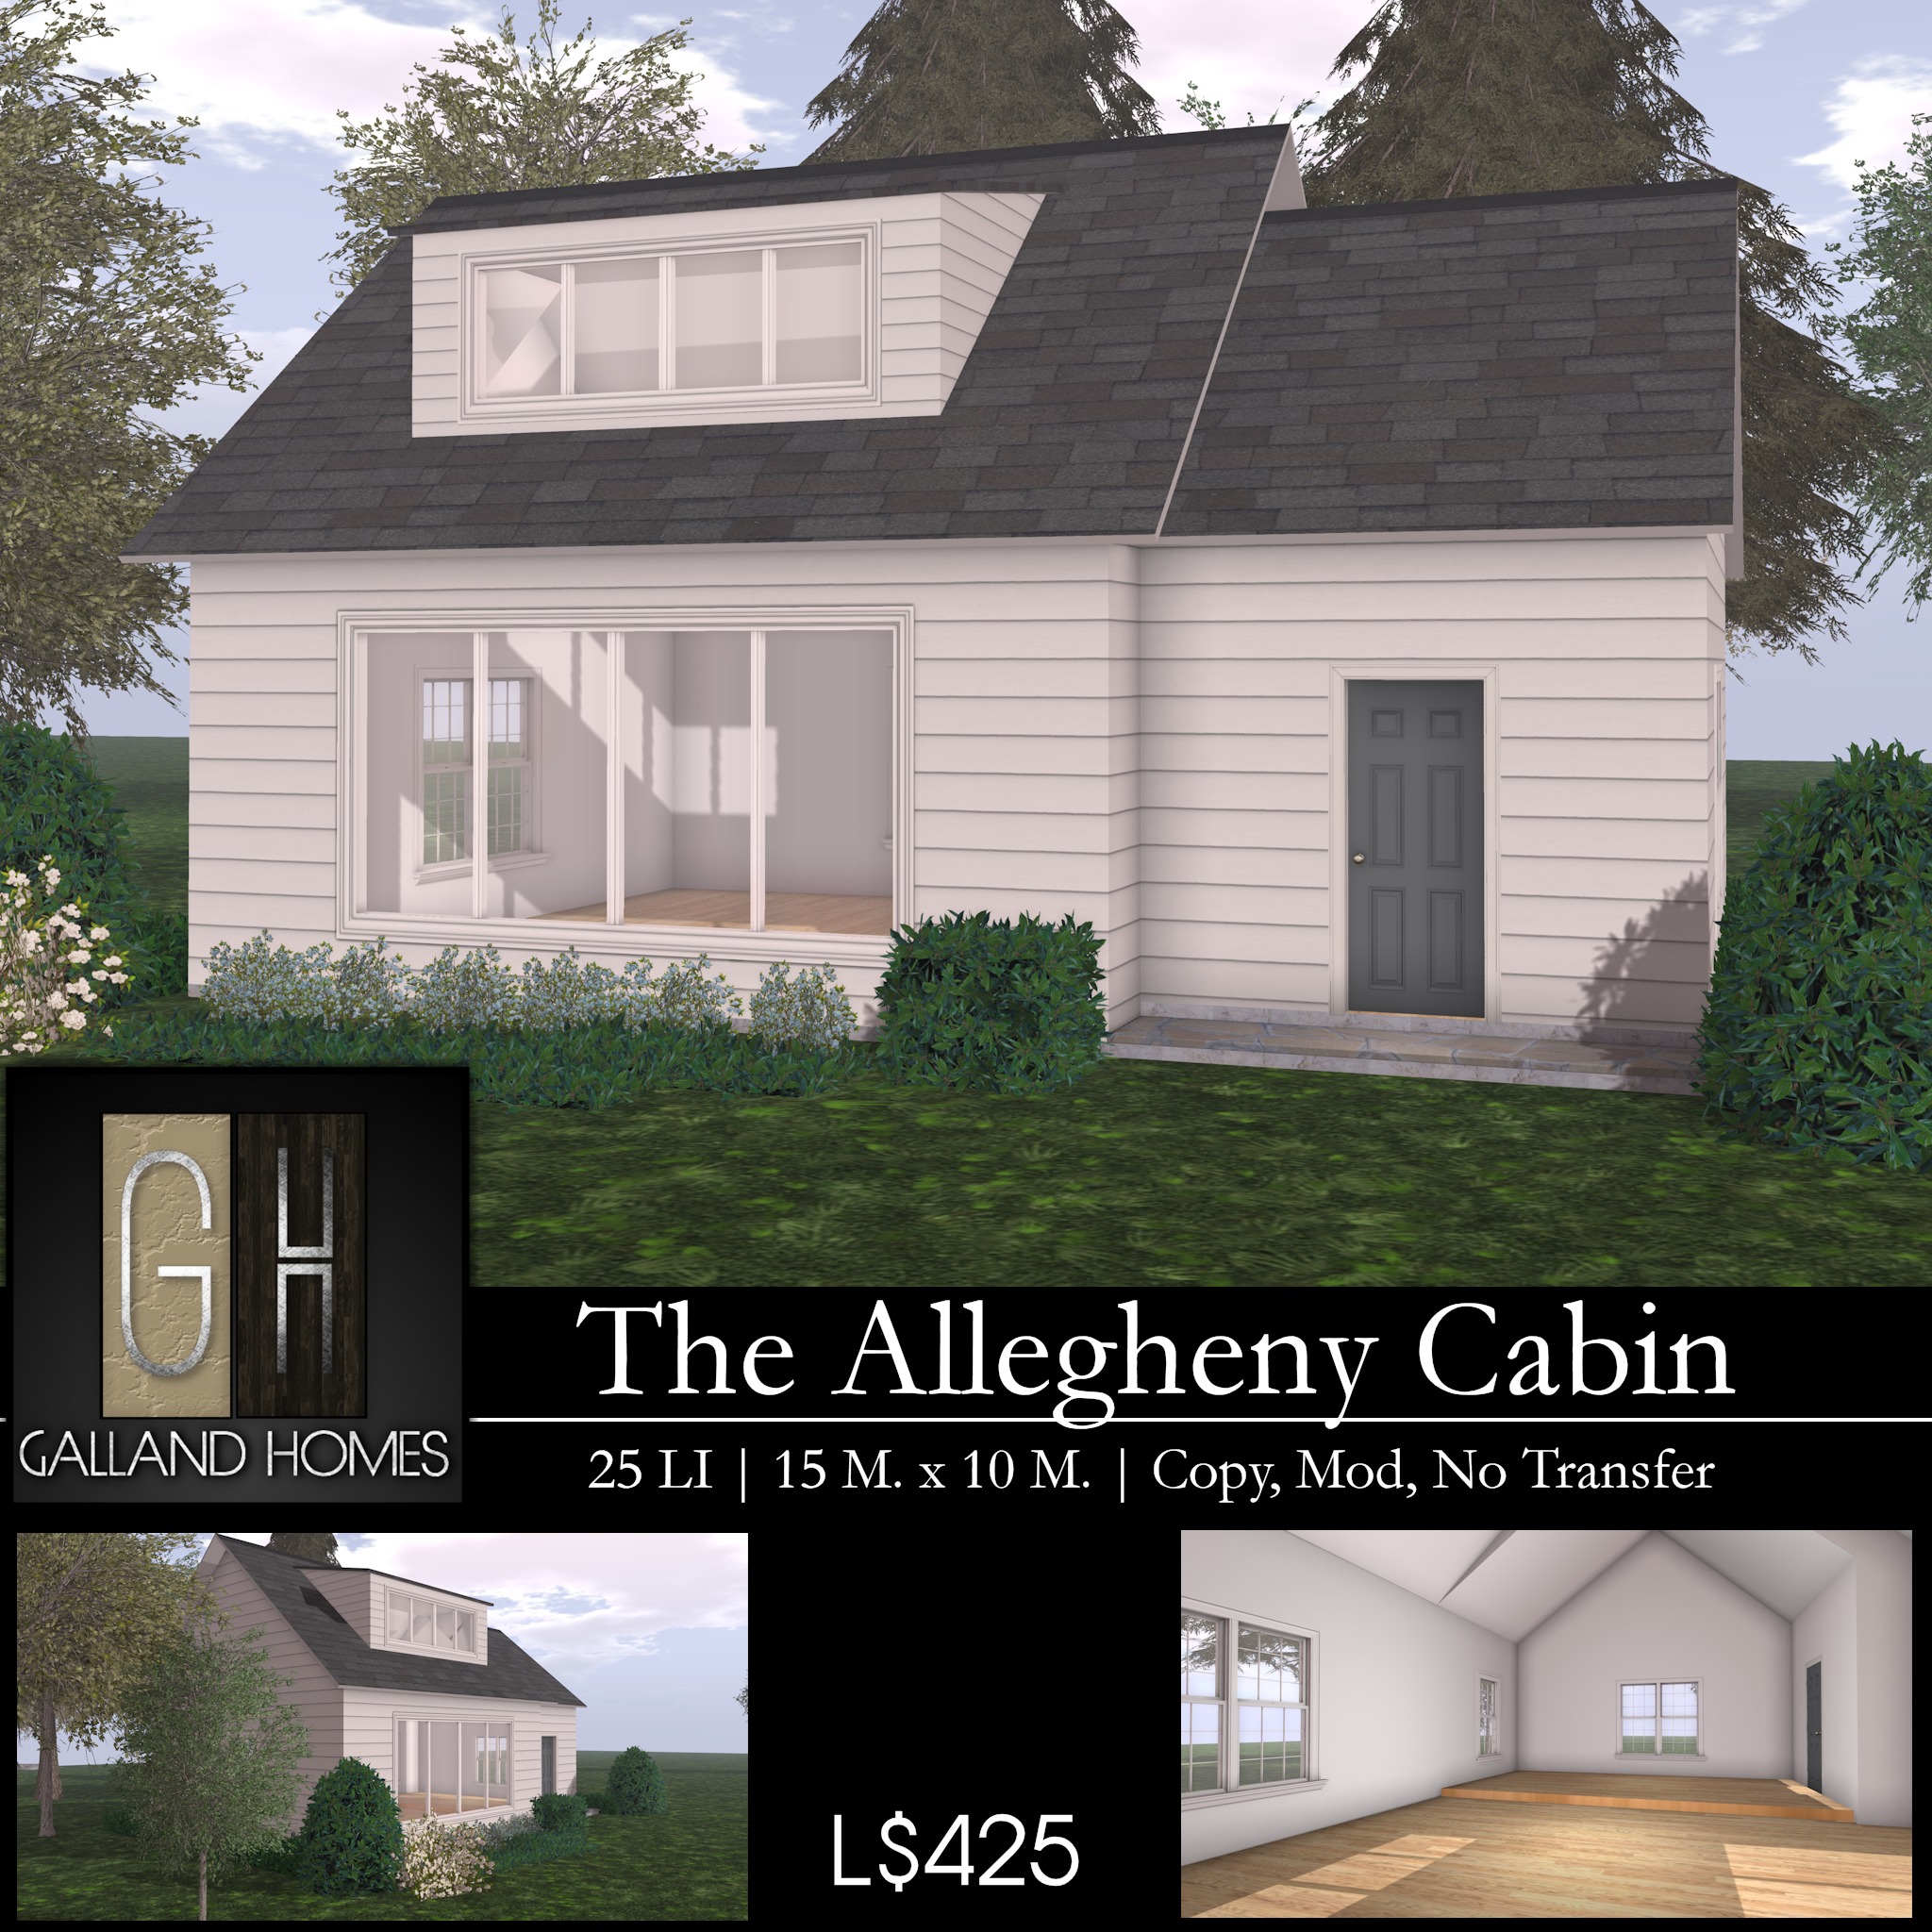 Galland Homes – The Allegheny Cabin